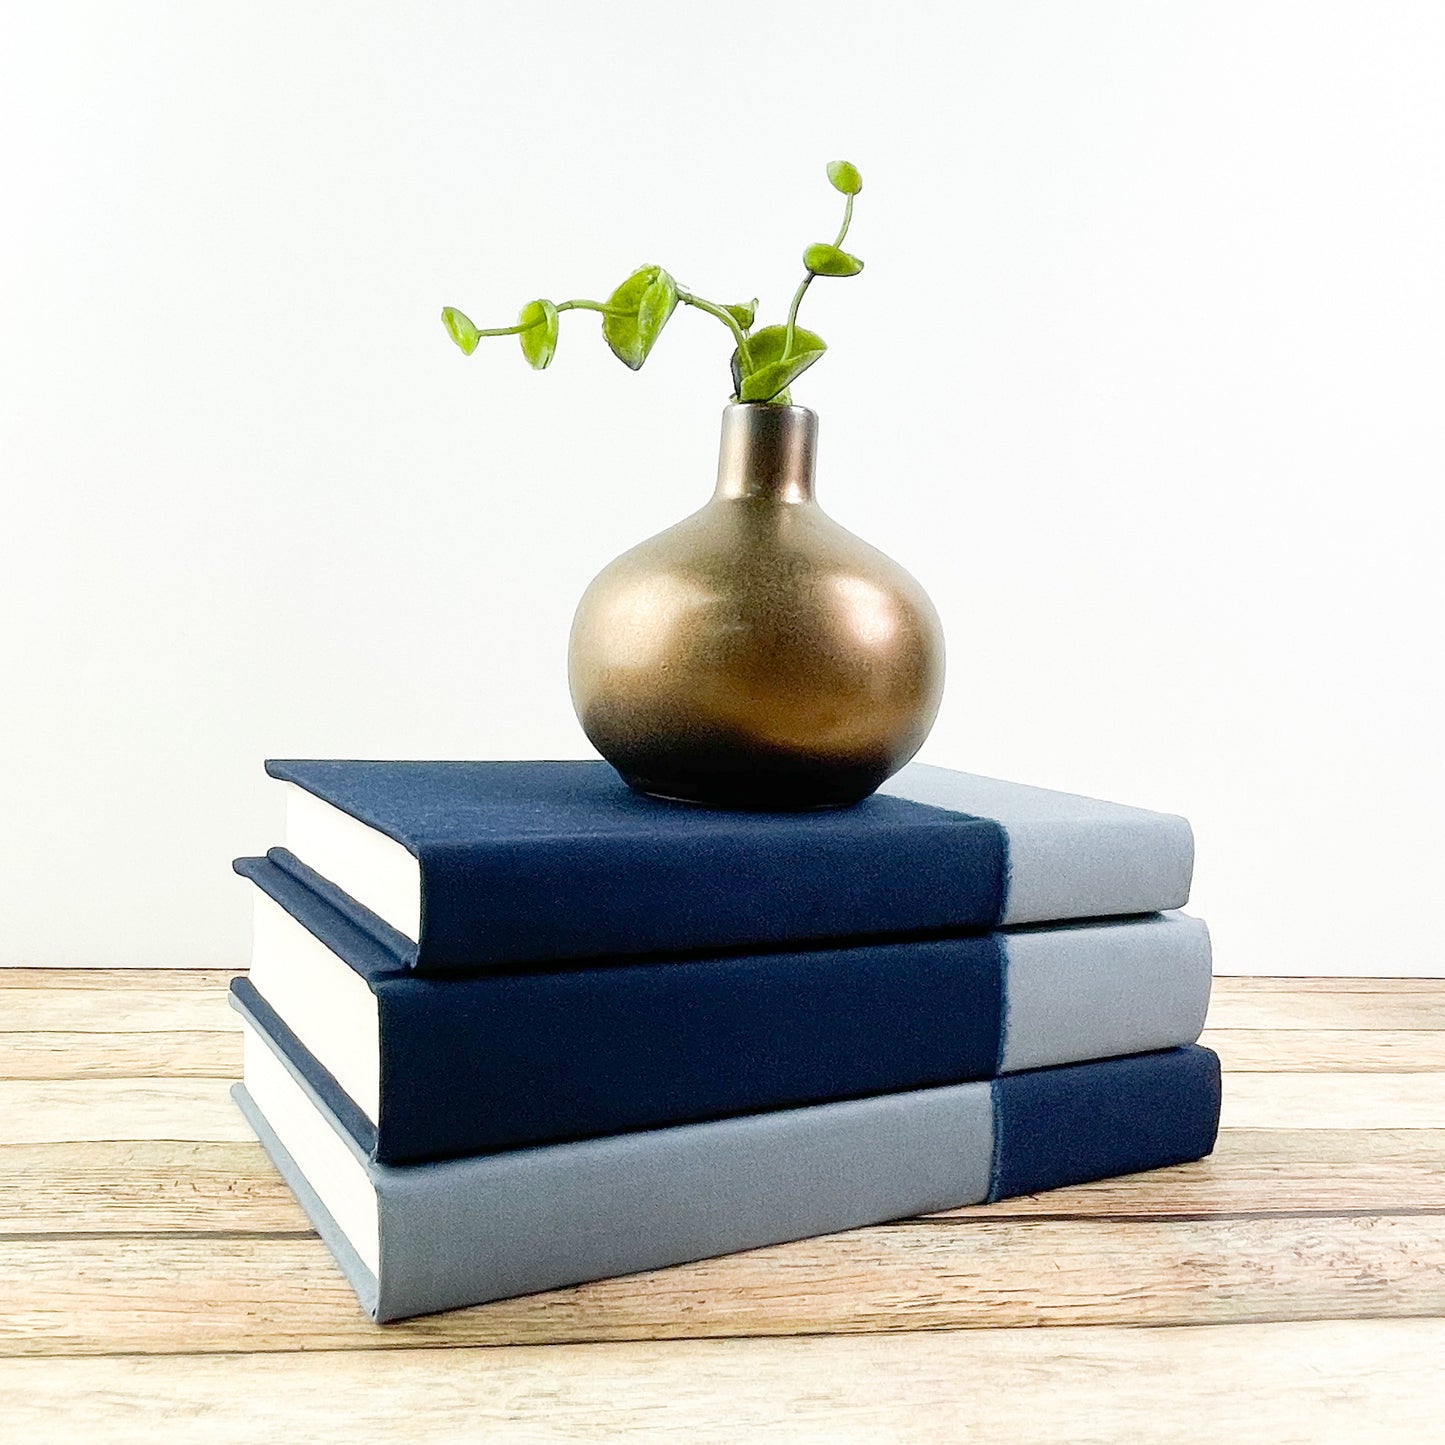 Shades of Blue Books for Decor